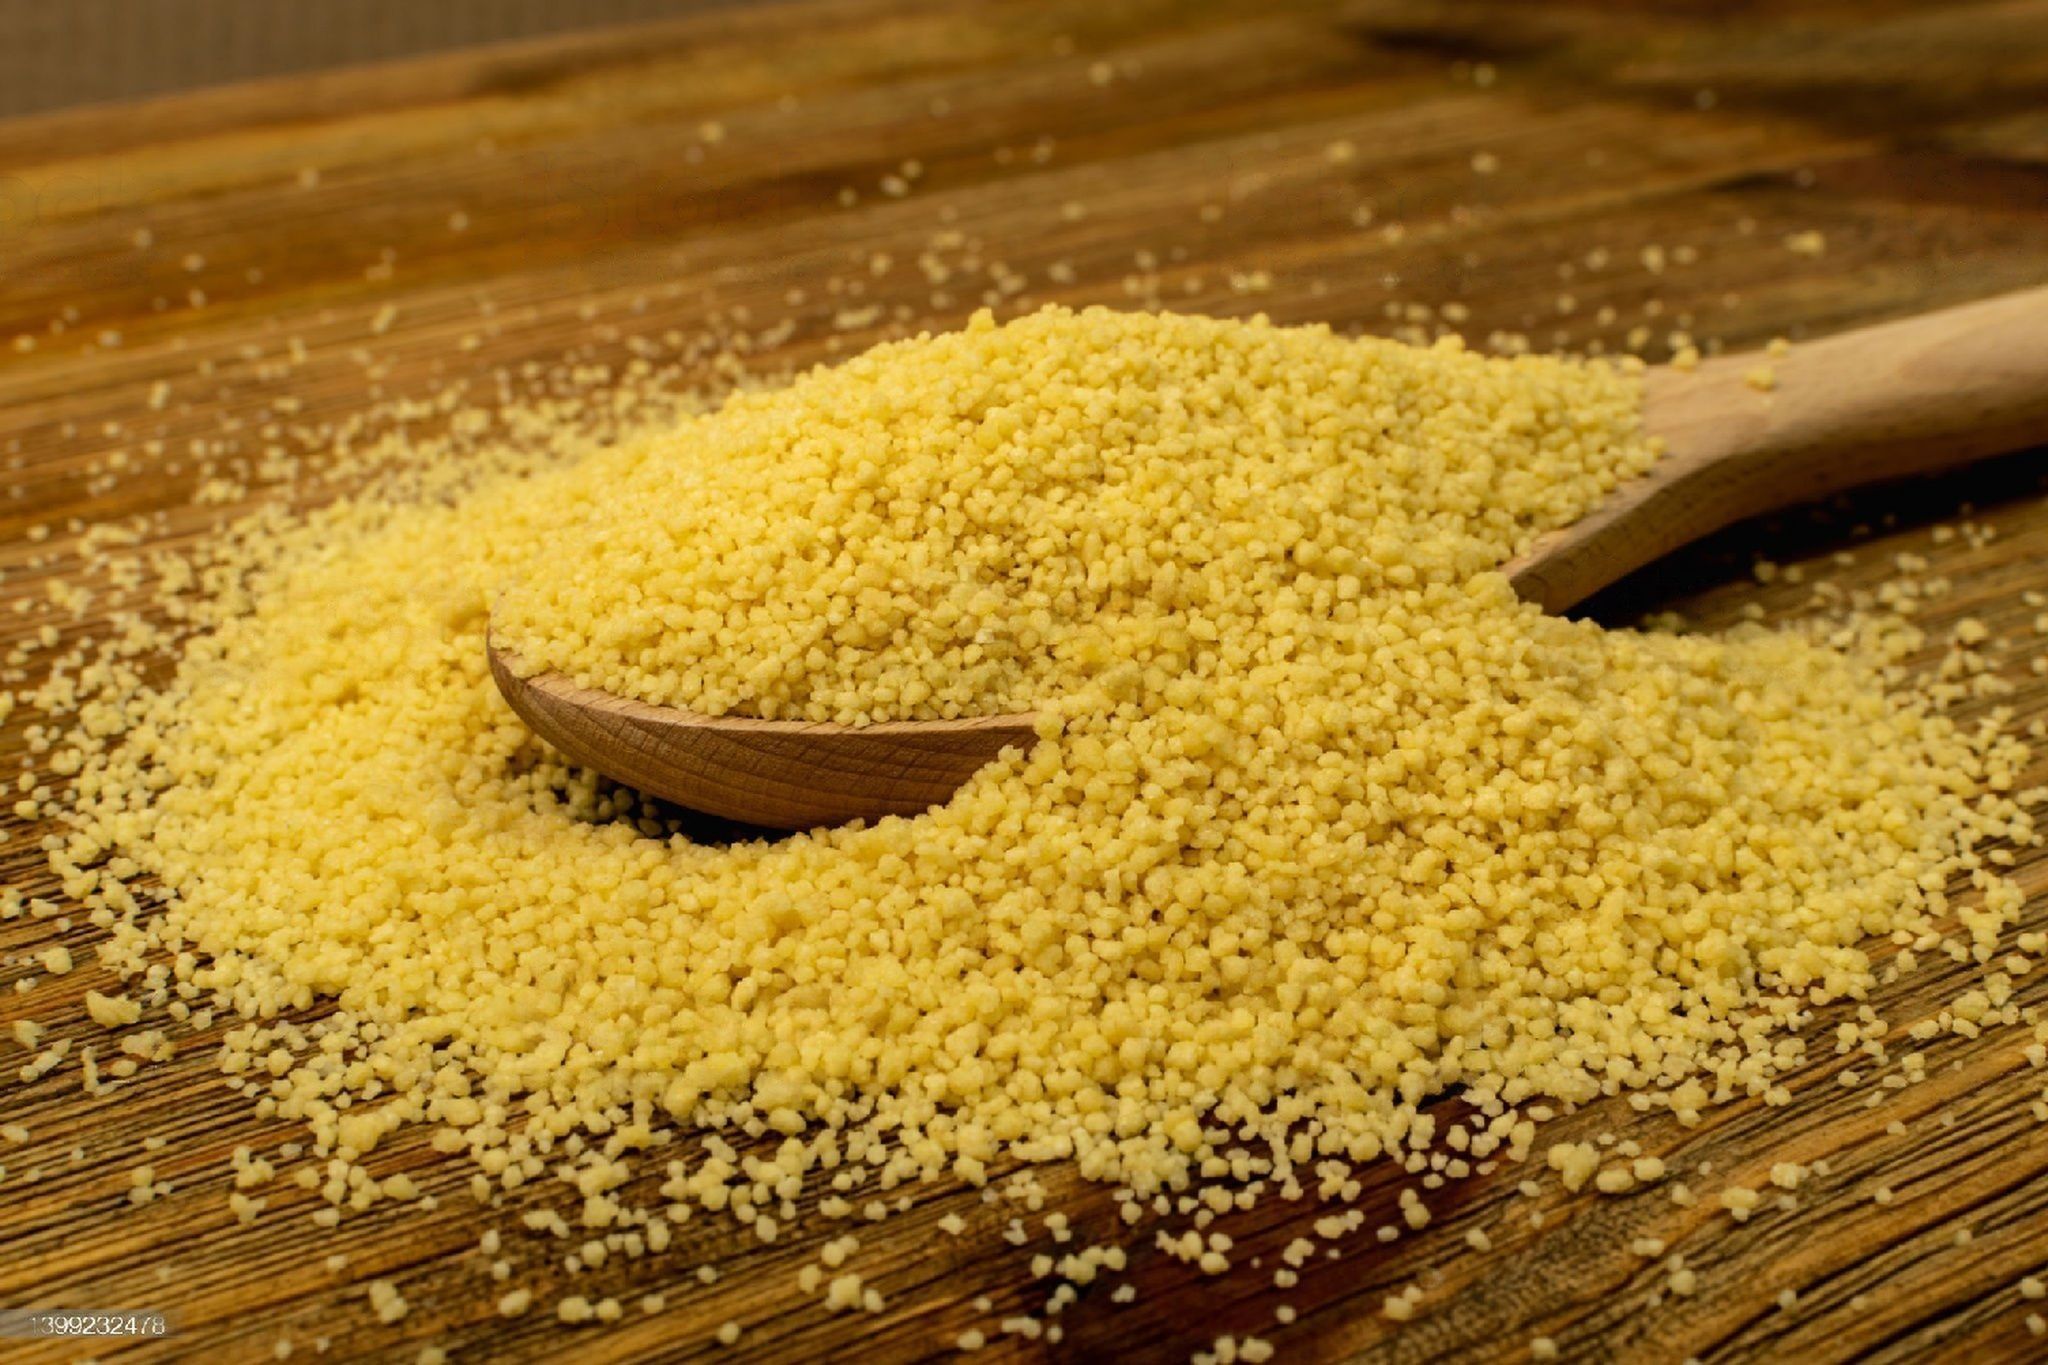 How to Make Semolina or What Is the Benefits Of Semolina?